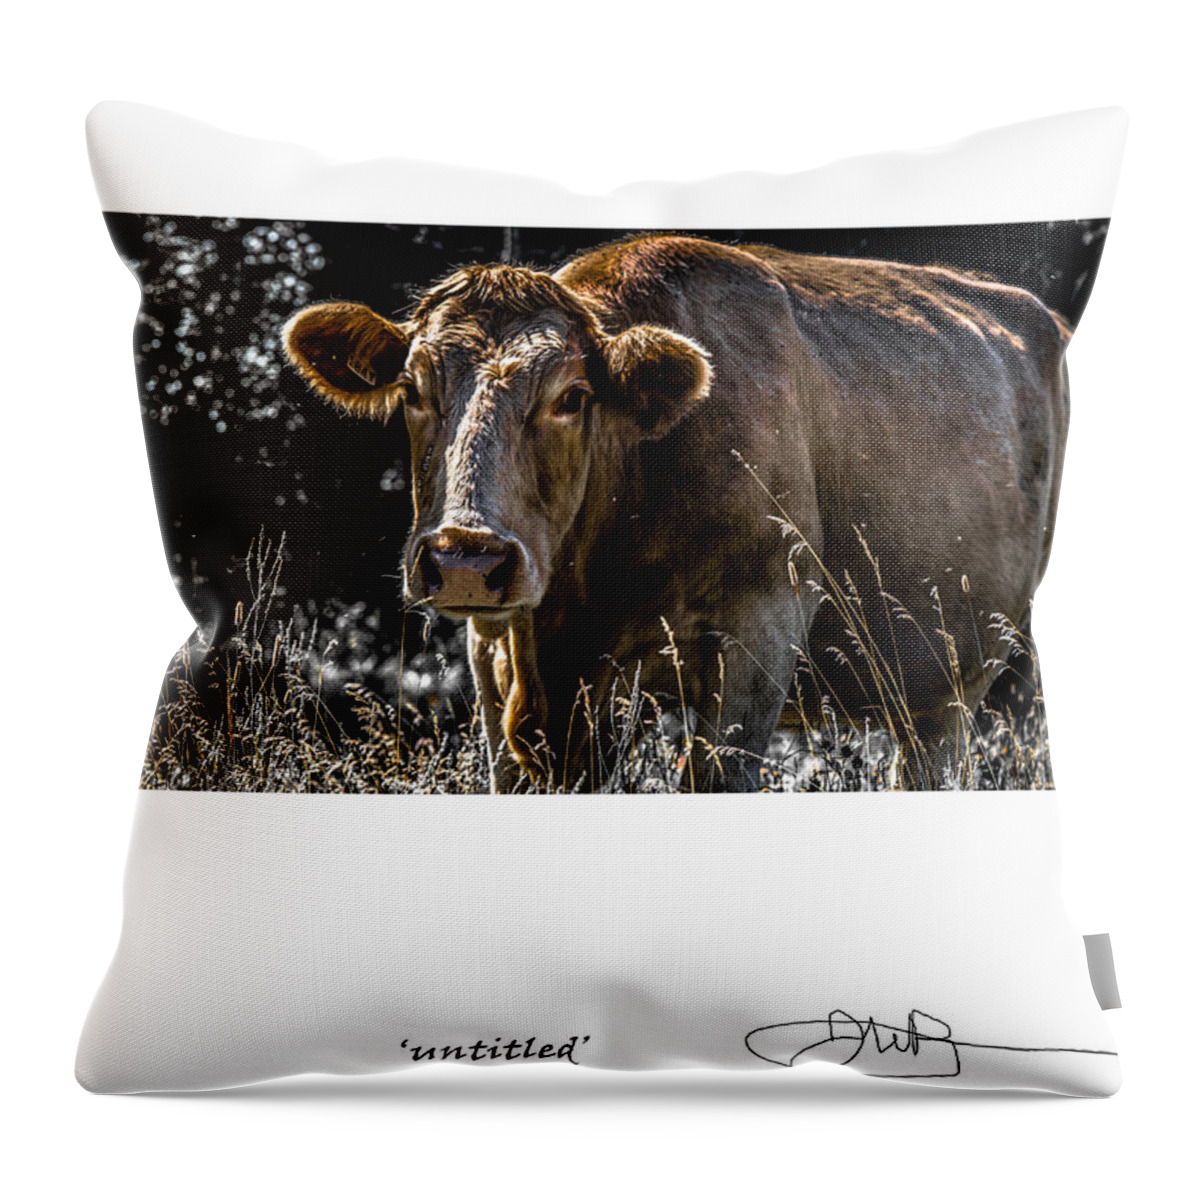 Signed Limited Edition Of 10 Throw Pillow featuring the digital art 24 by Jerald Blackstock